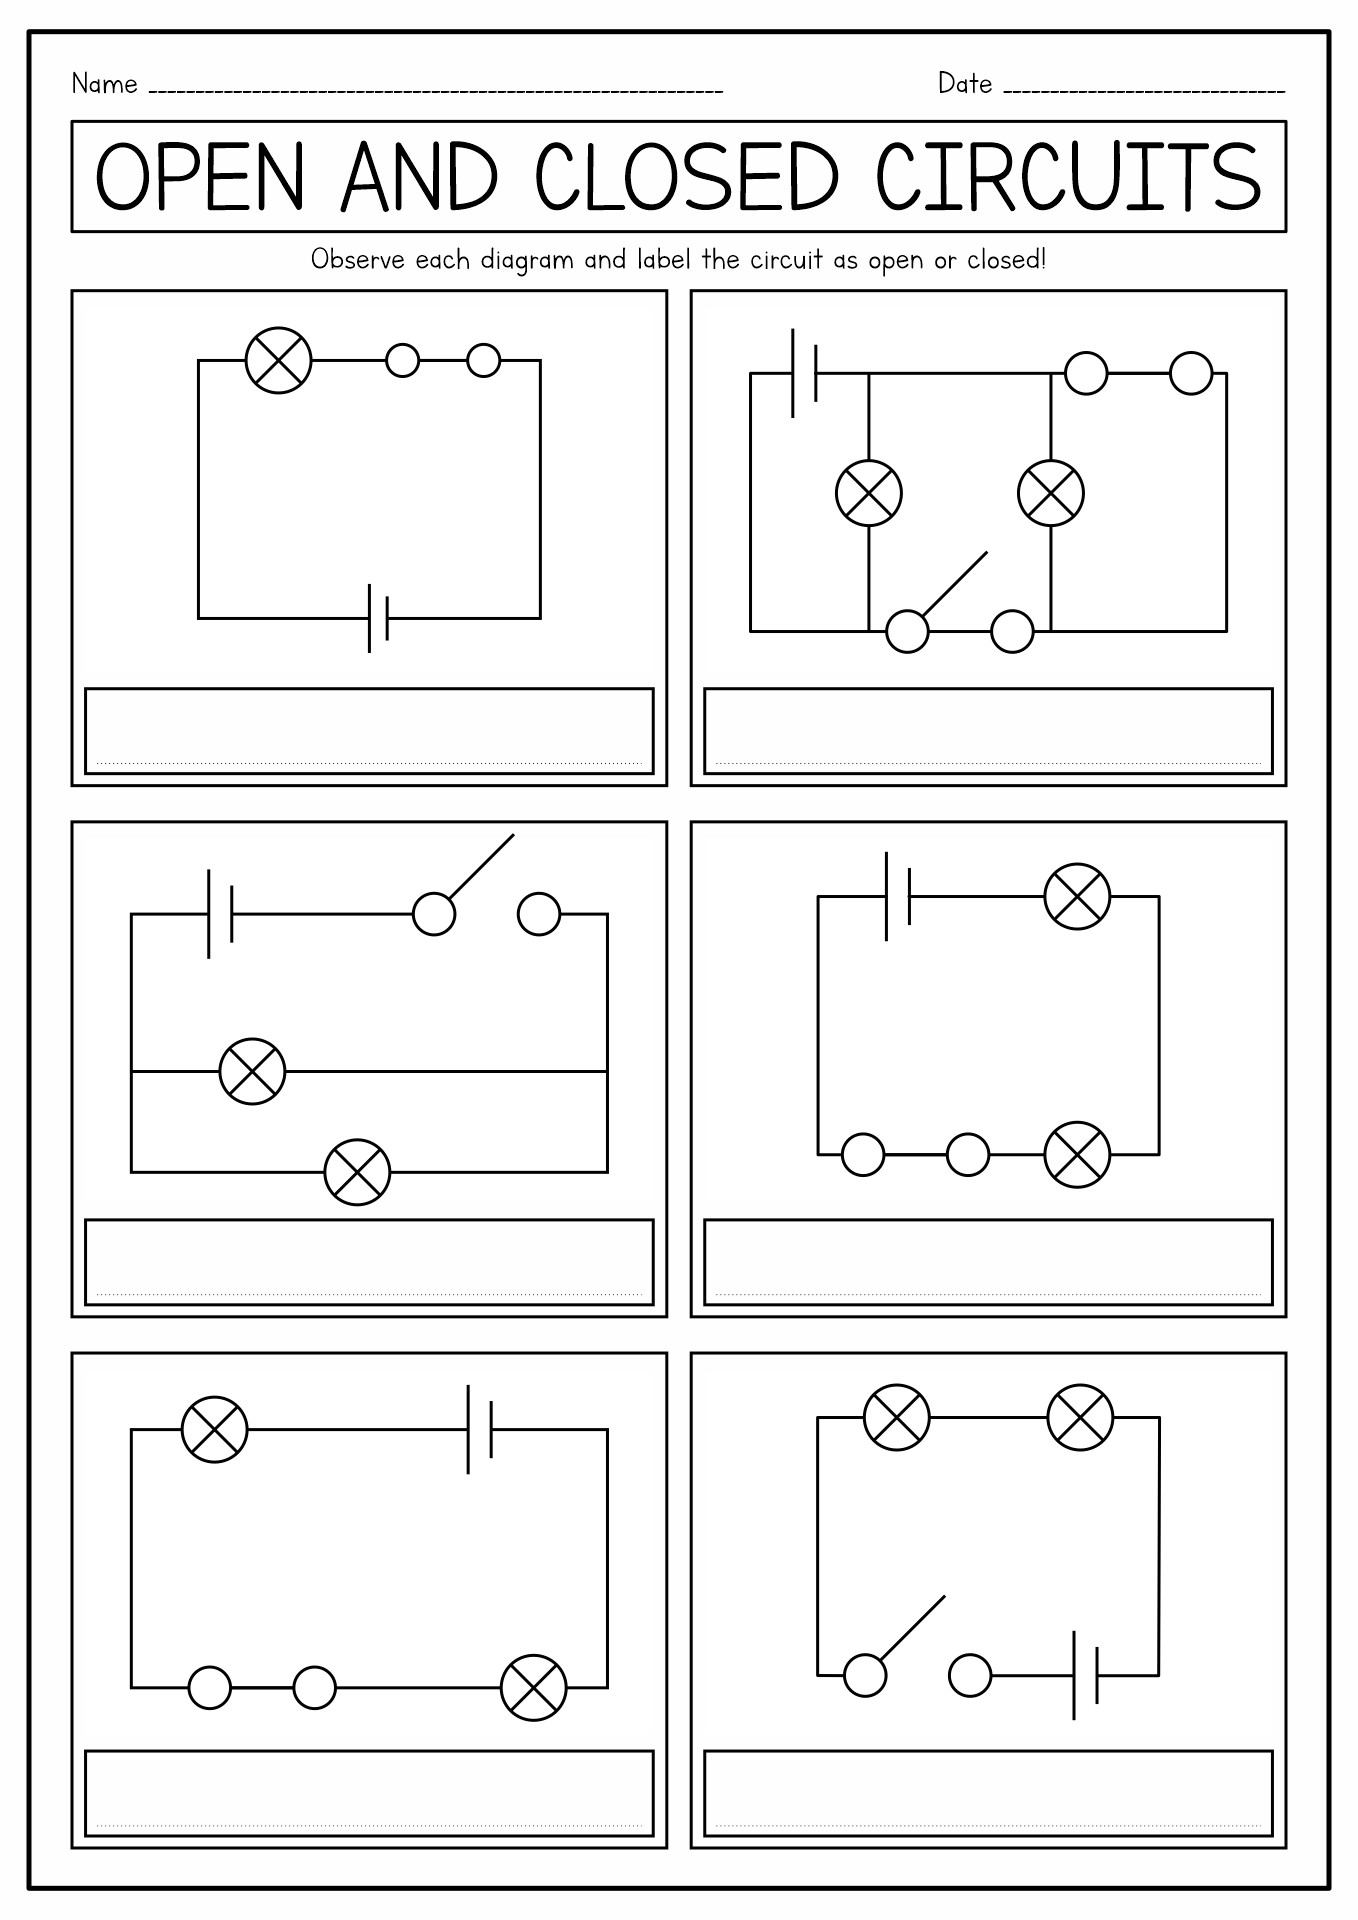 Open and Closed Circuits Worksheet Image